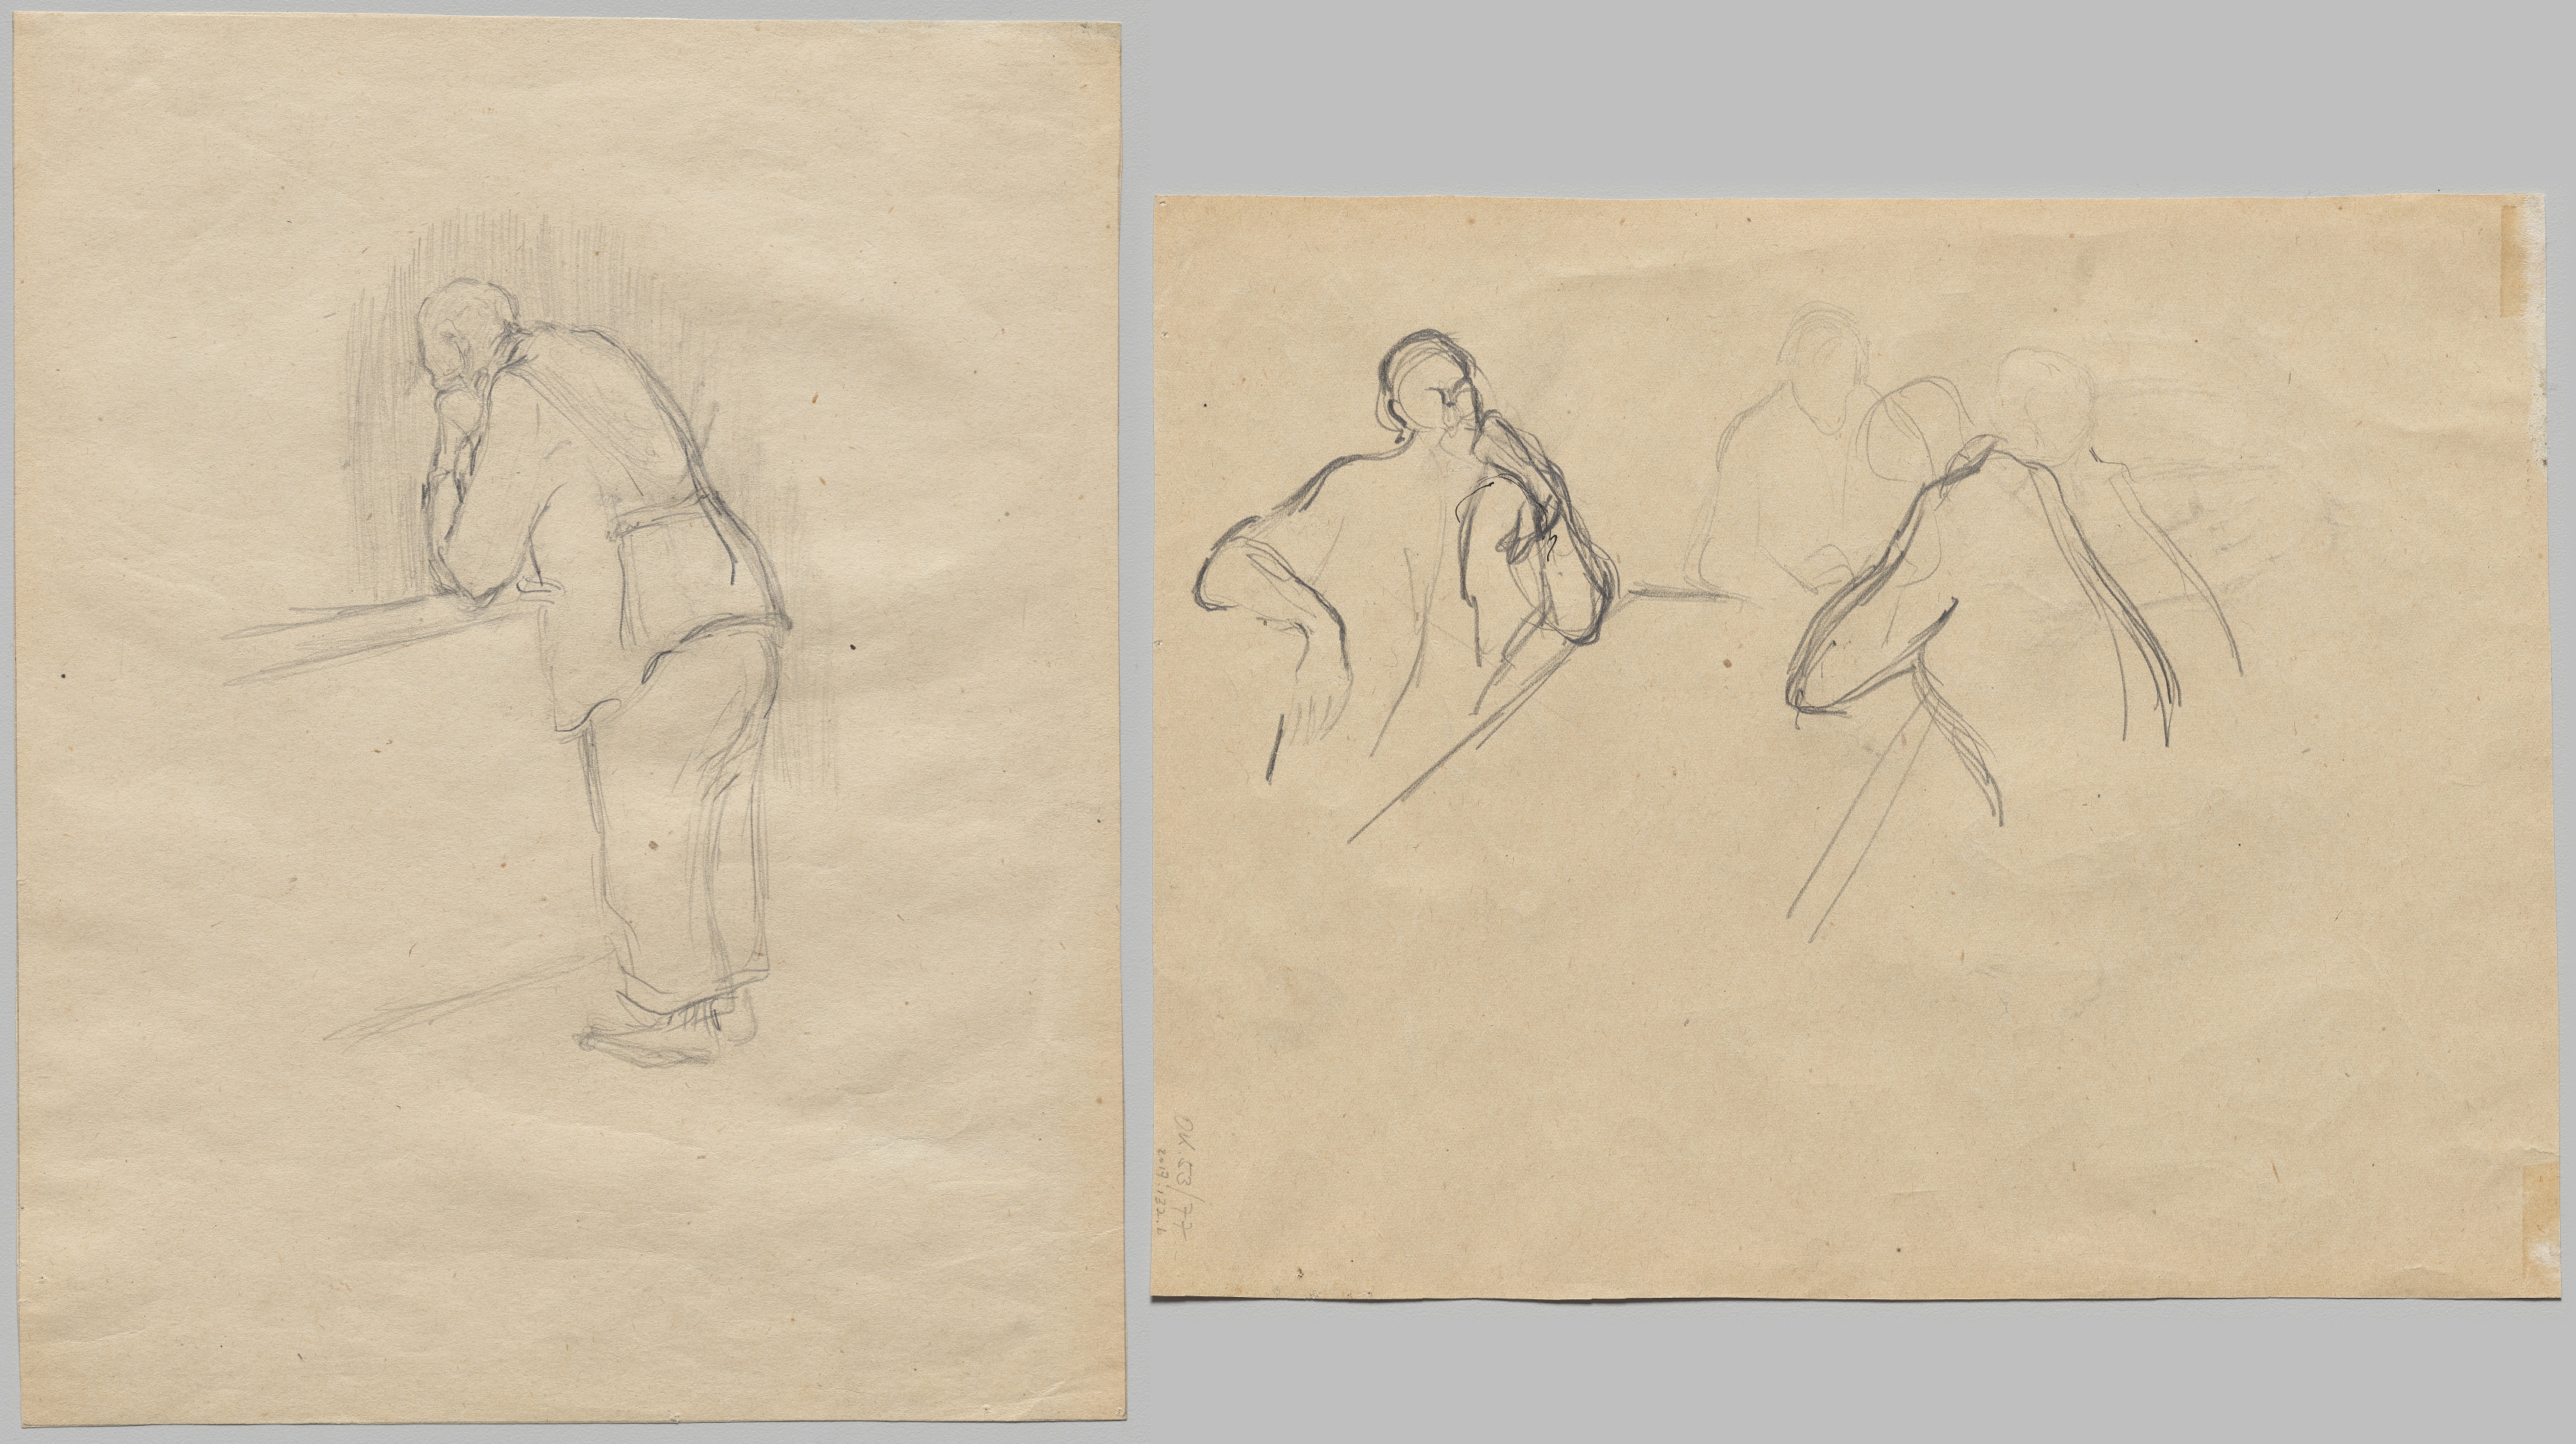 Budapest Ghetto Series 1944: Man Leaning (recto), Four Figures Seated at a Table (verso)